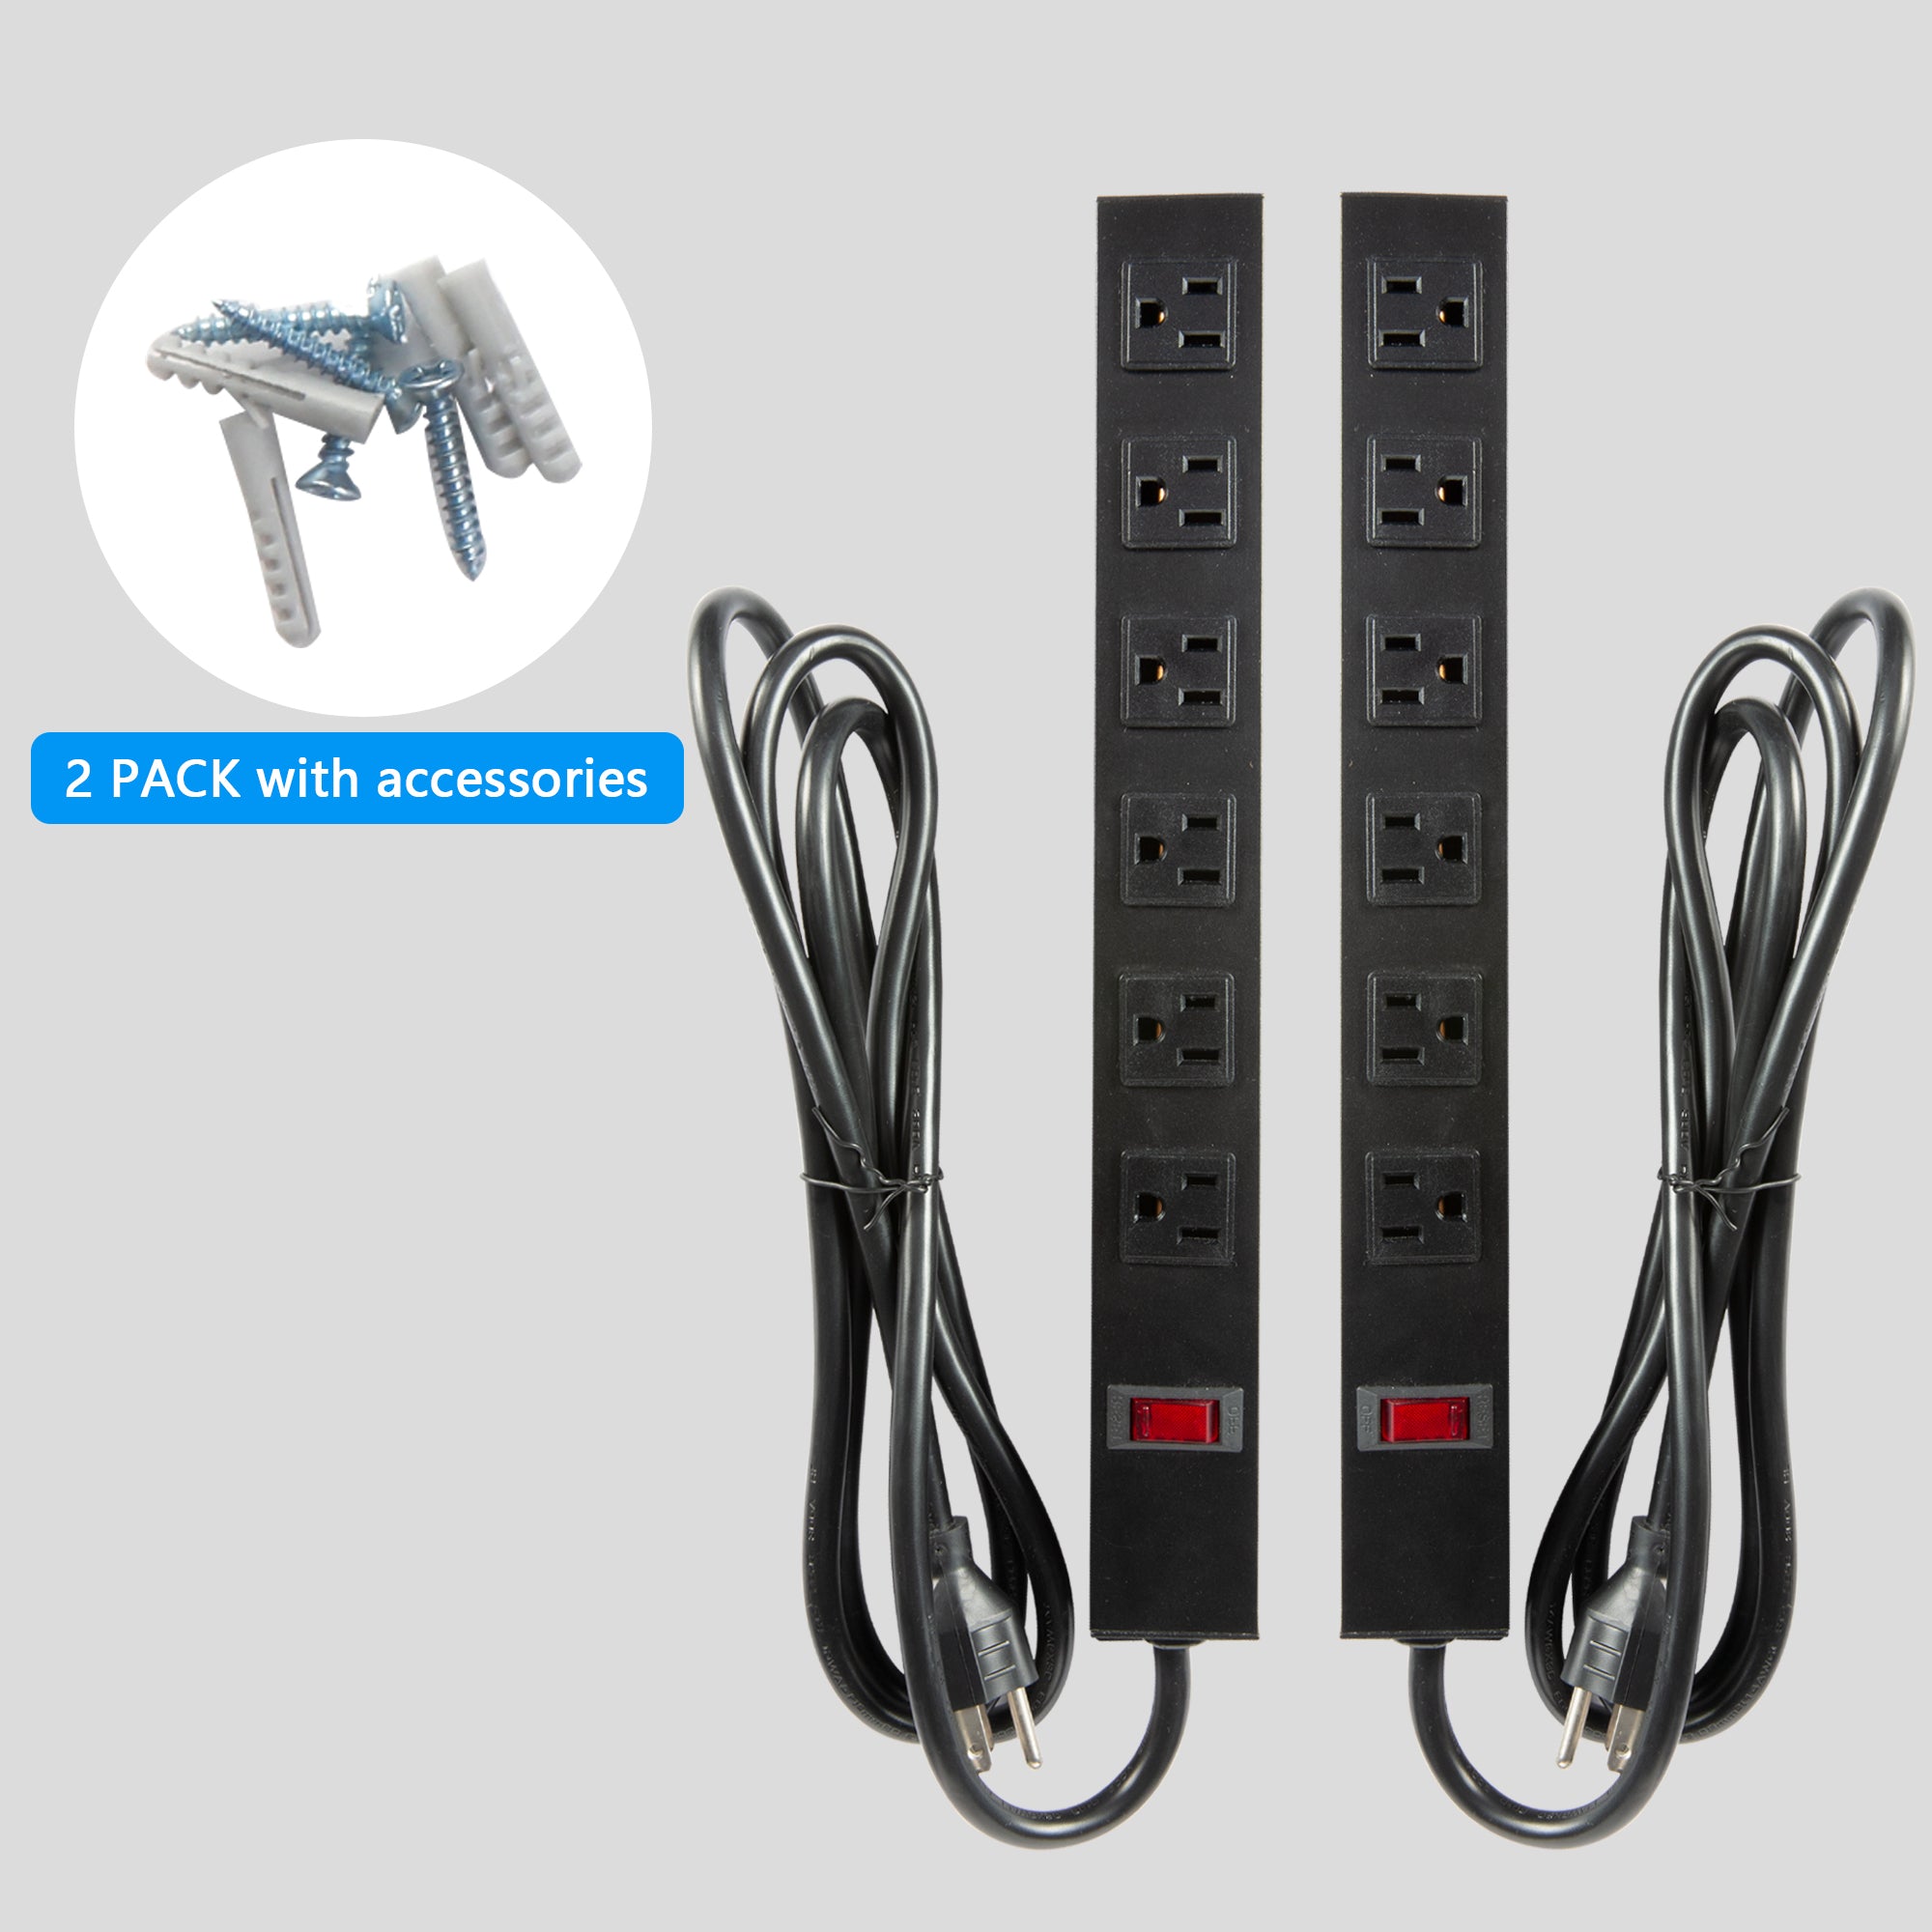 Set of 2 Power Strip with 6 Outlets 6 ft Extension Cord Wall Mount Metal Power Outlet, Black